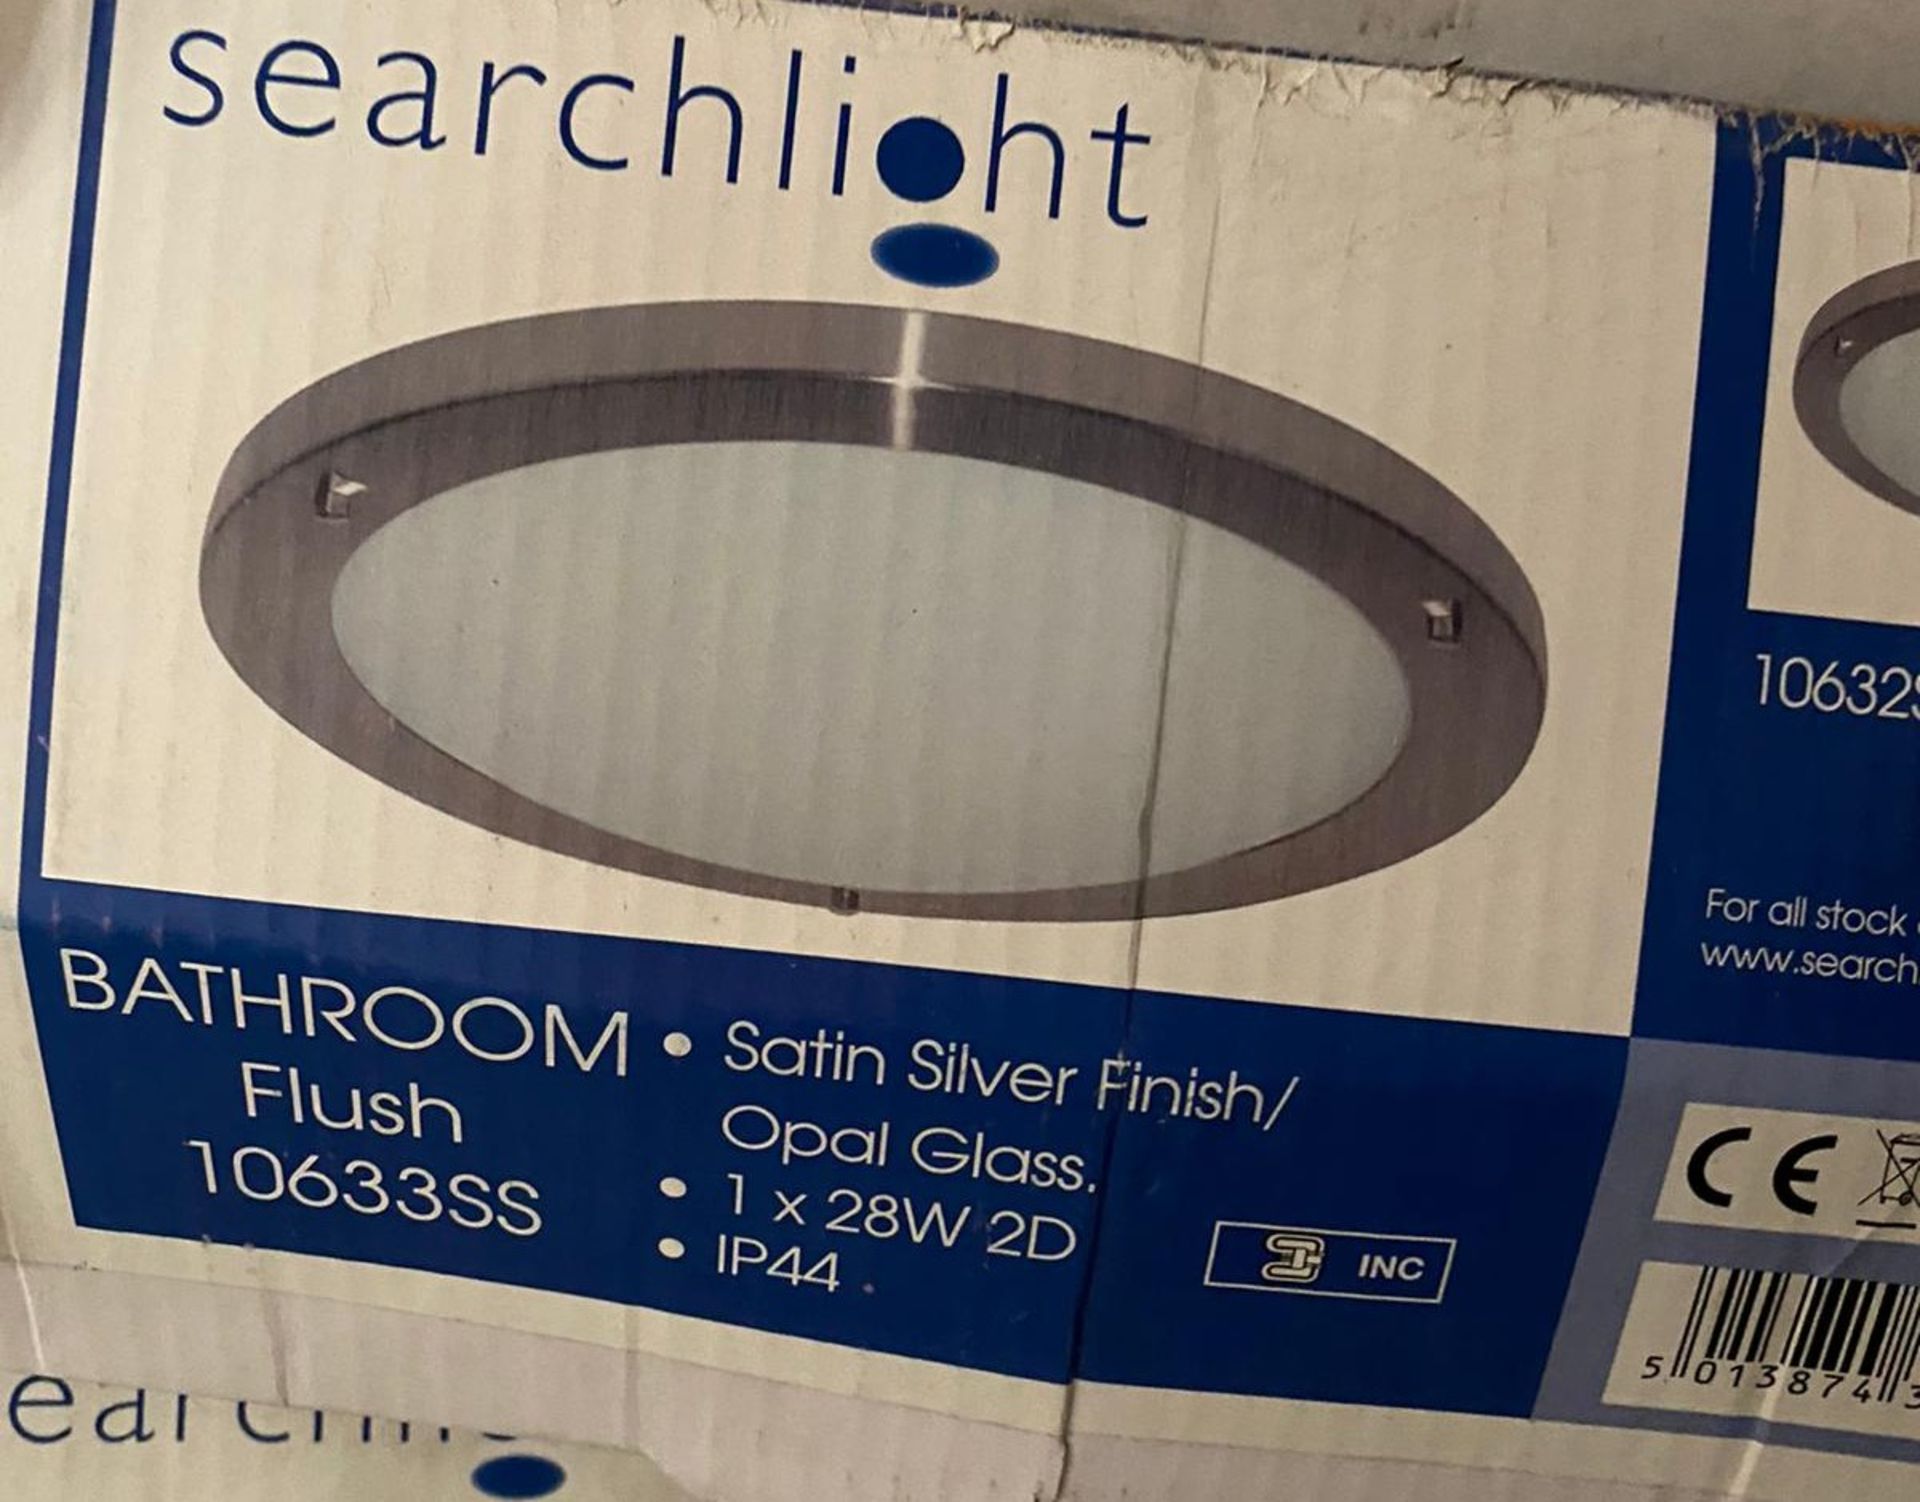 1 x Searchlight bathroom Flush in a satin silver finish - Ref: 10632SS - New and Boxed - RRP: £60.00 - Image 4 of 4